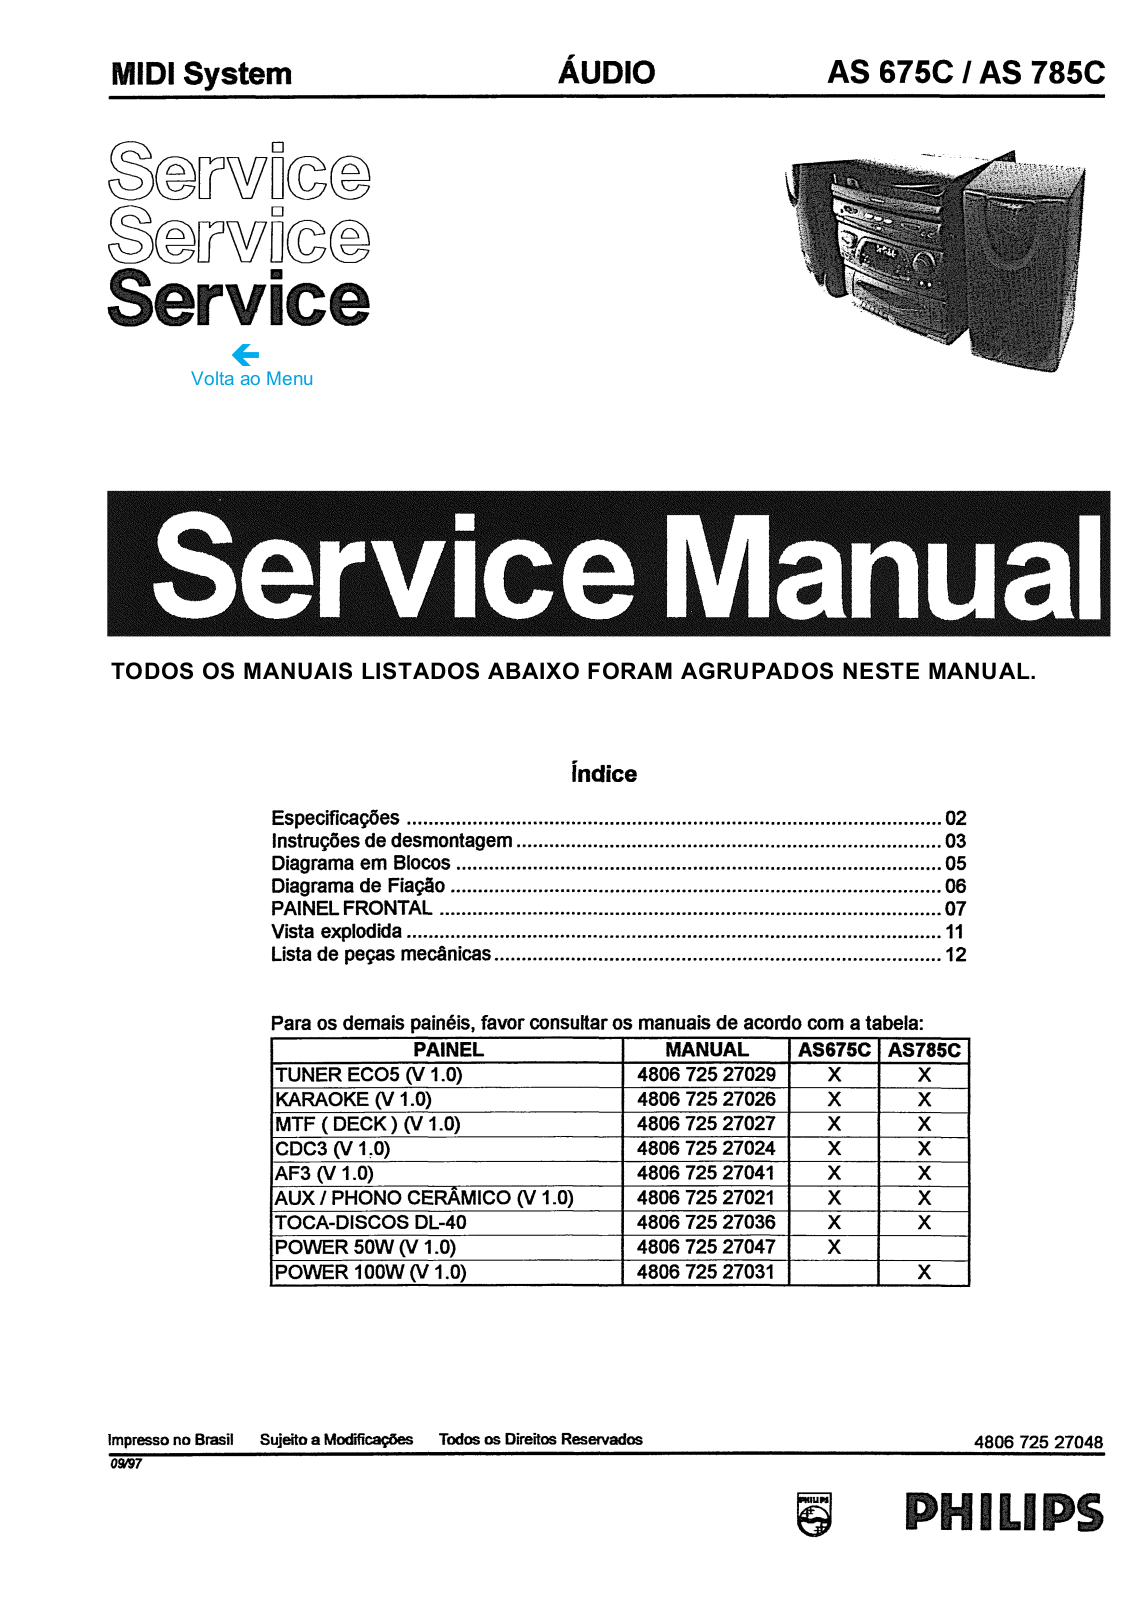 Philips AS-675-C, AS-785-C Service manual